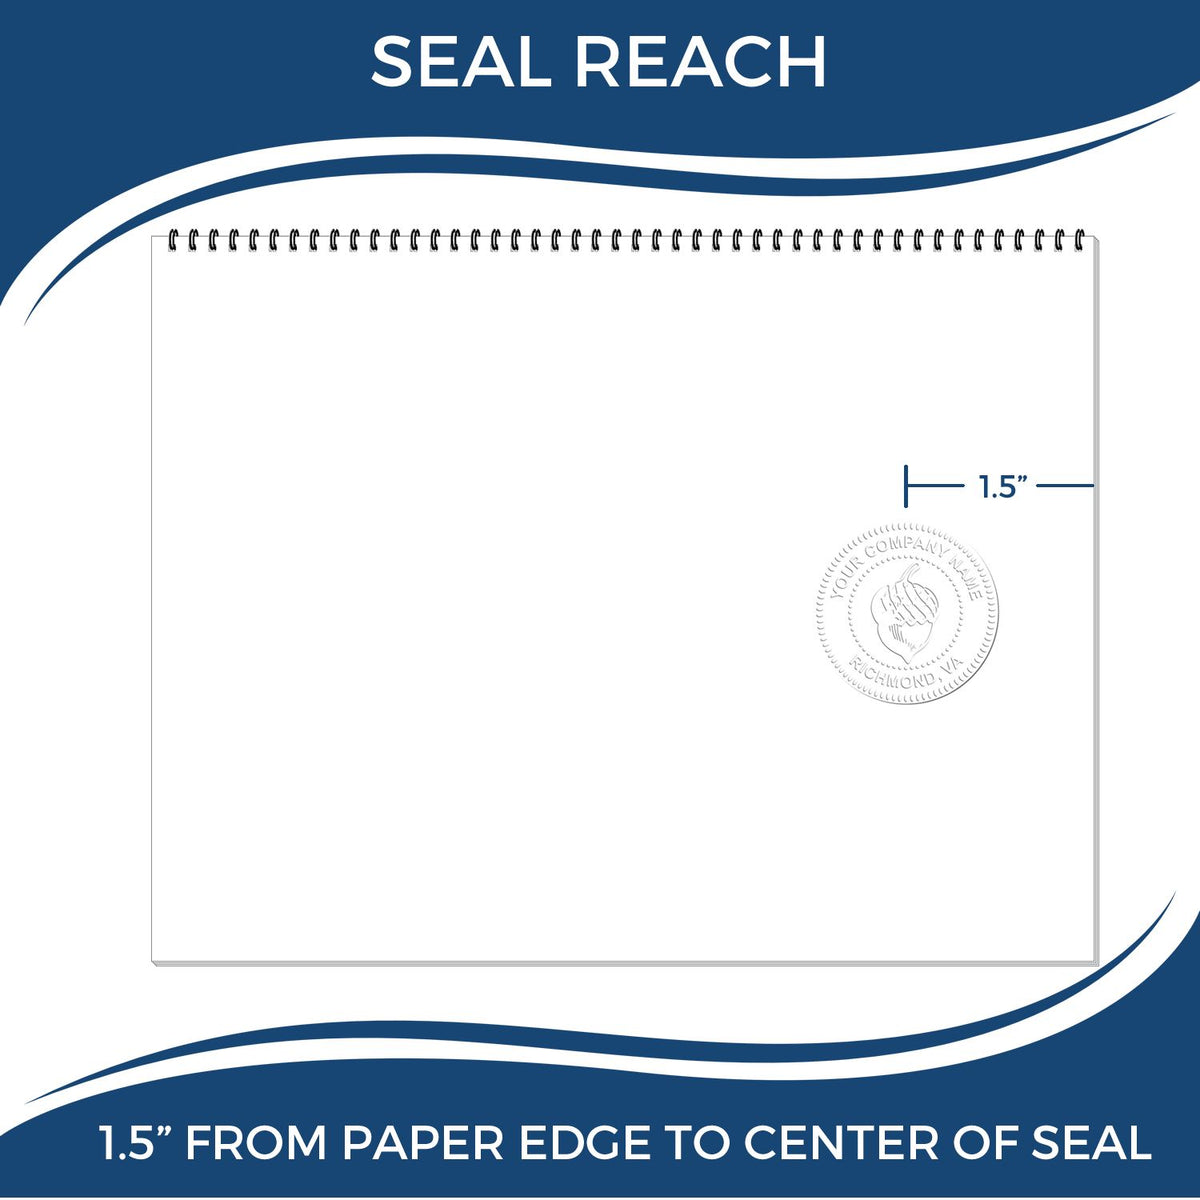 An infographic showing the seal reach which is represented by a ruler and a miniature seal image of the Hybrid Minnesota Architect Seal